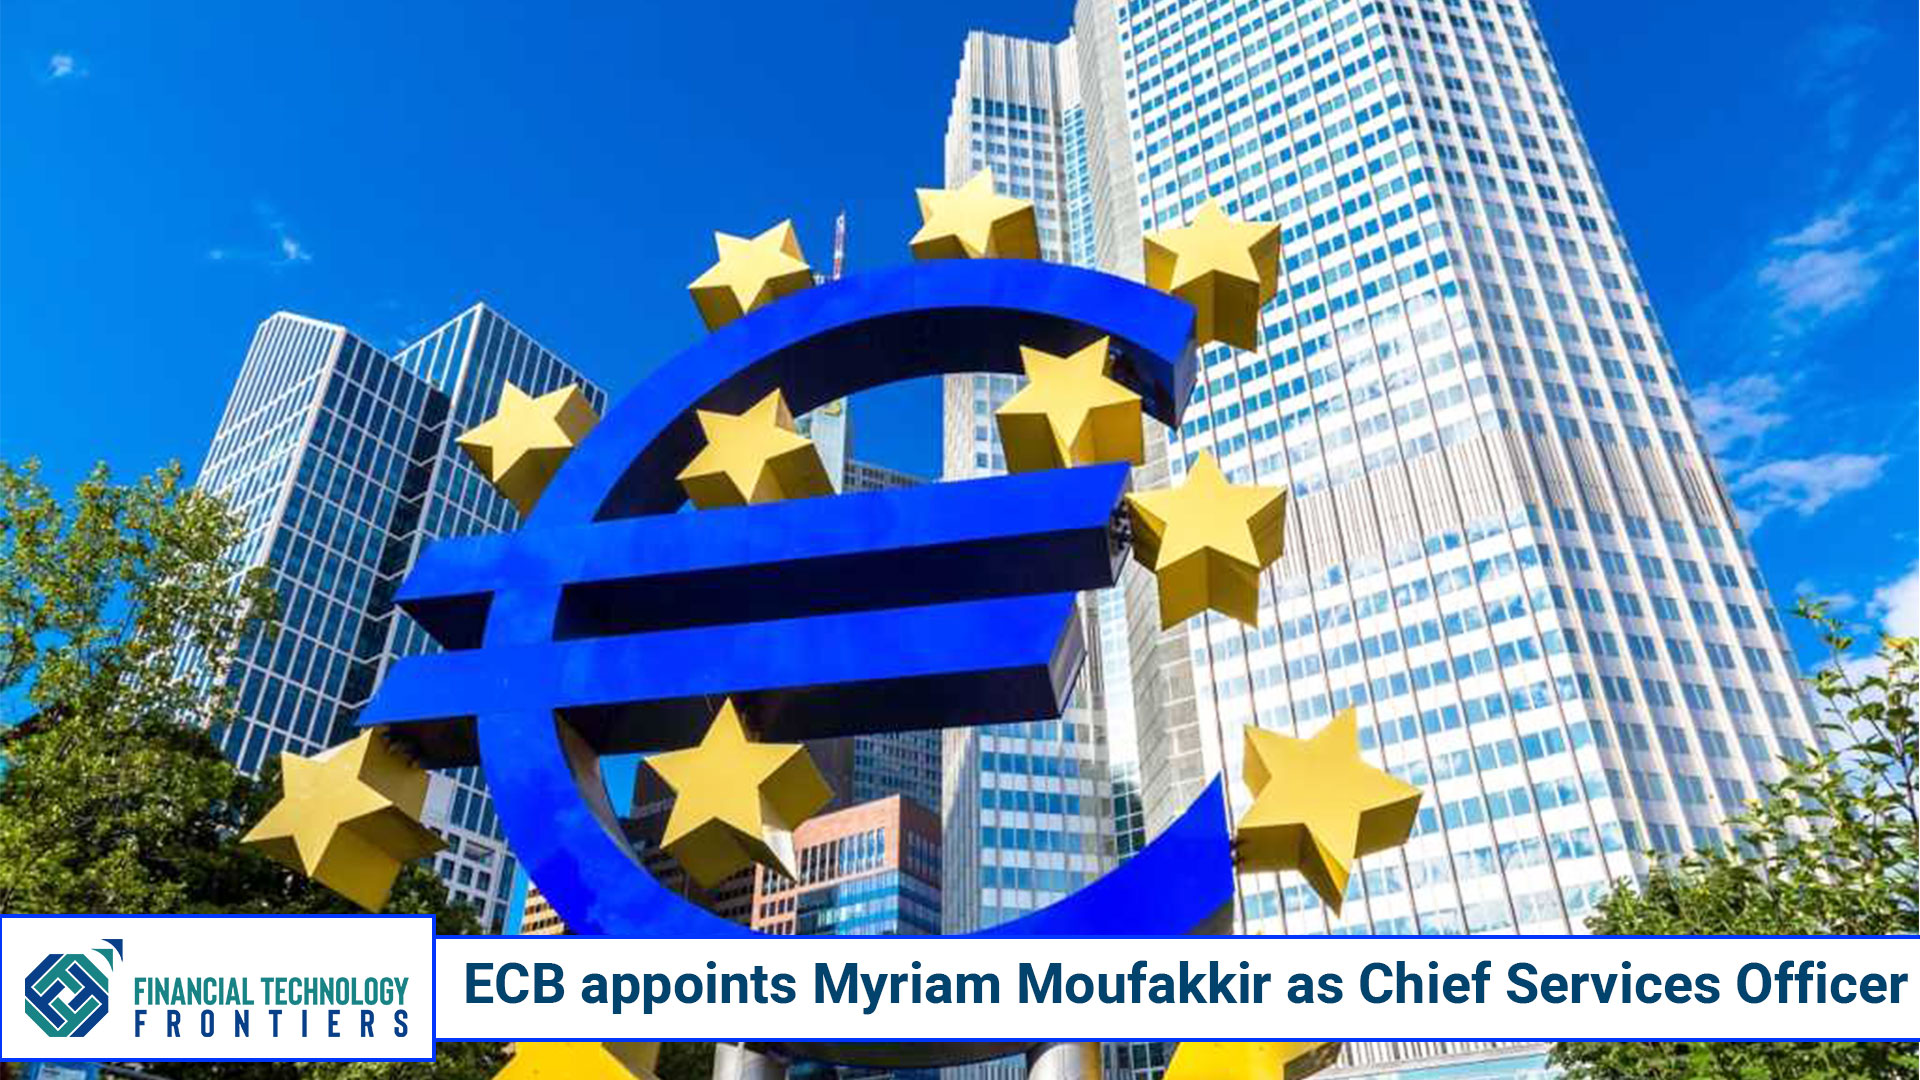 ECB appoints Myriam Moufakkir as Chief Services Officer